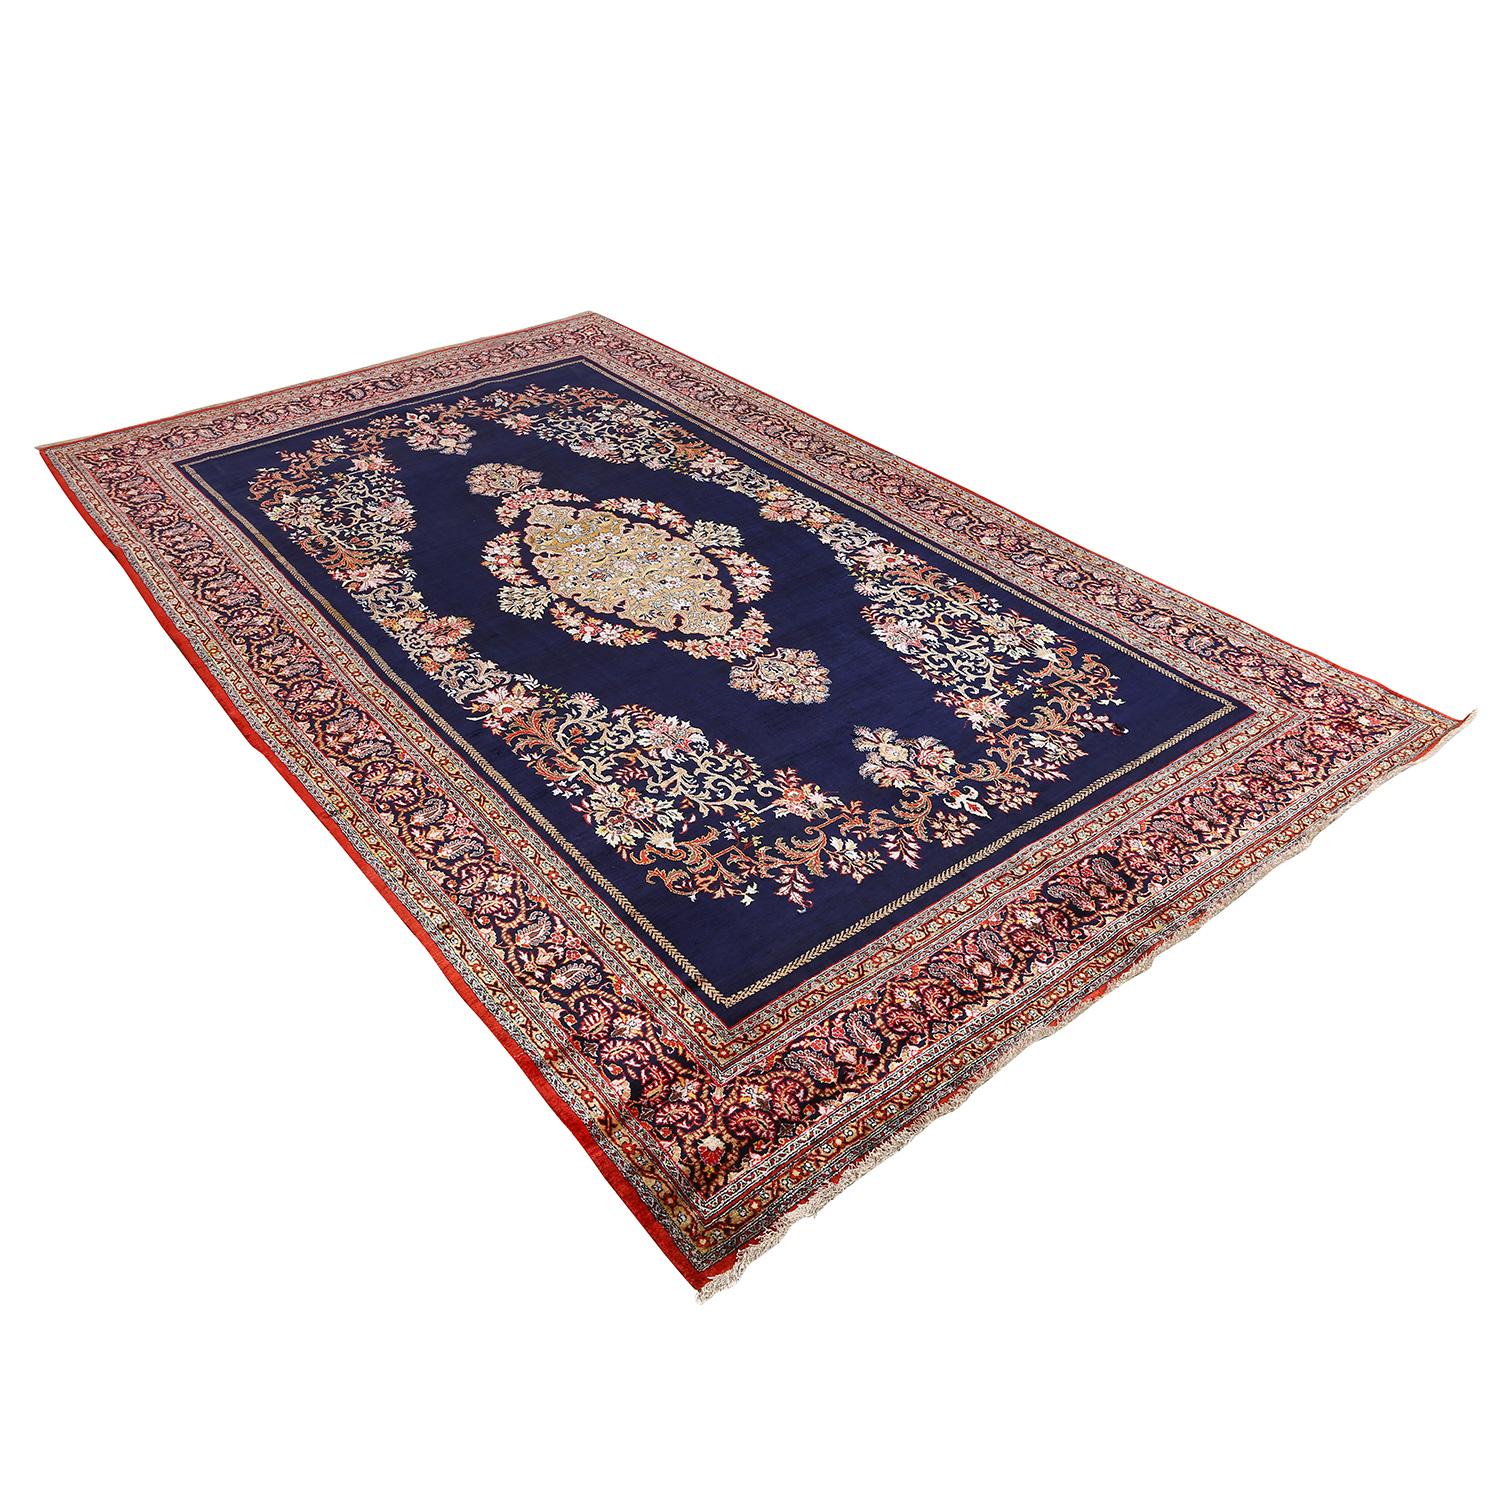 This Pure Silk Antique Kashan is a true marvel, a piece of art that transcends time and place. Originating from the revered weaving center of Kashan in Persia, these rugs are not just floor coverings; they are exceptional heirlooms that embody